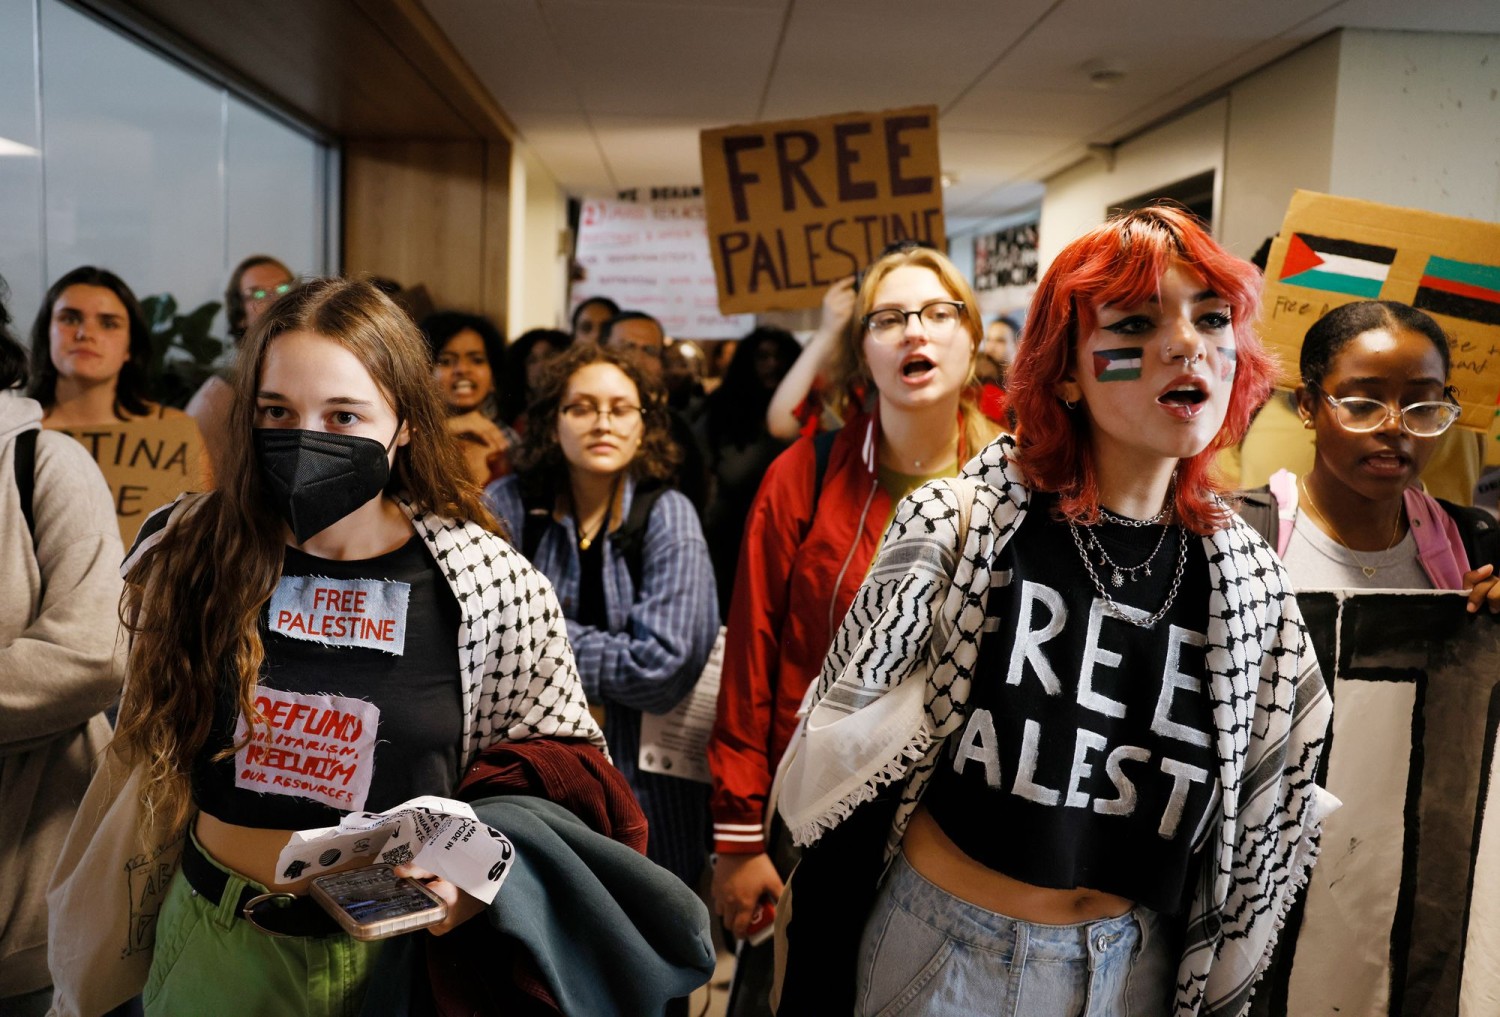 tudents at the University of Massachusetts, Amherst protested outside of the chancellor’s office last month. JESSICA RINALDI/THE BOSTON GLOBE/GETTY IMAGES